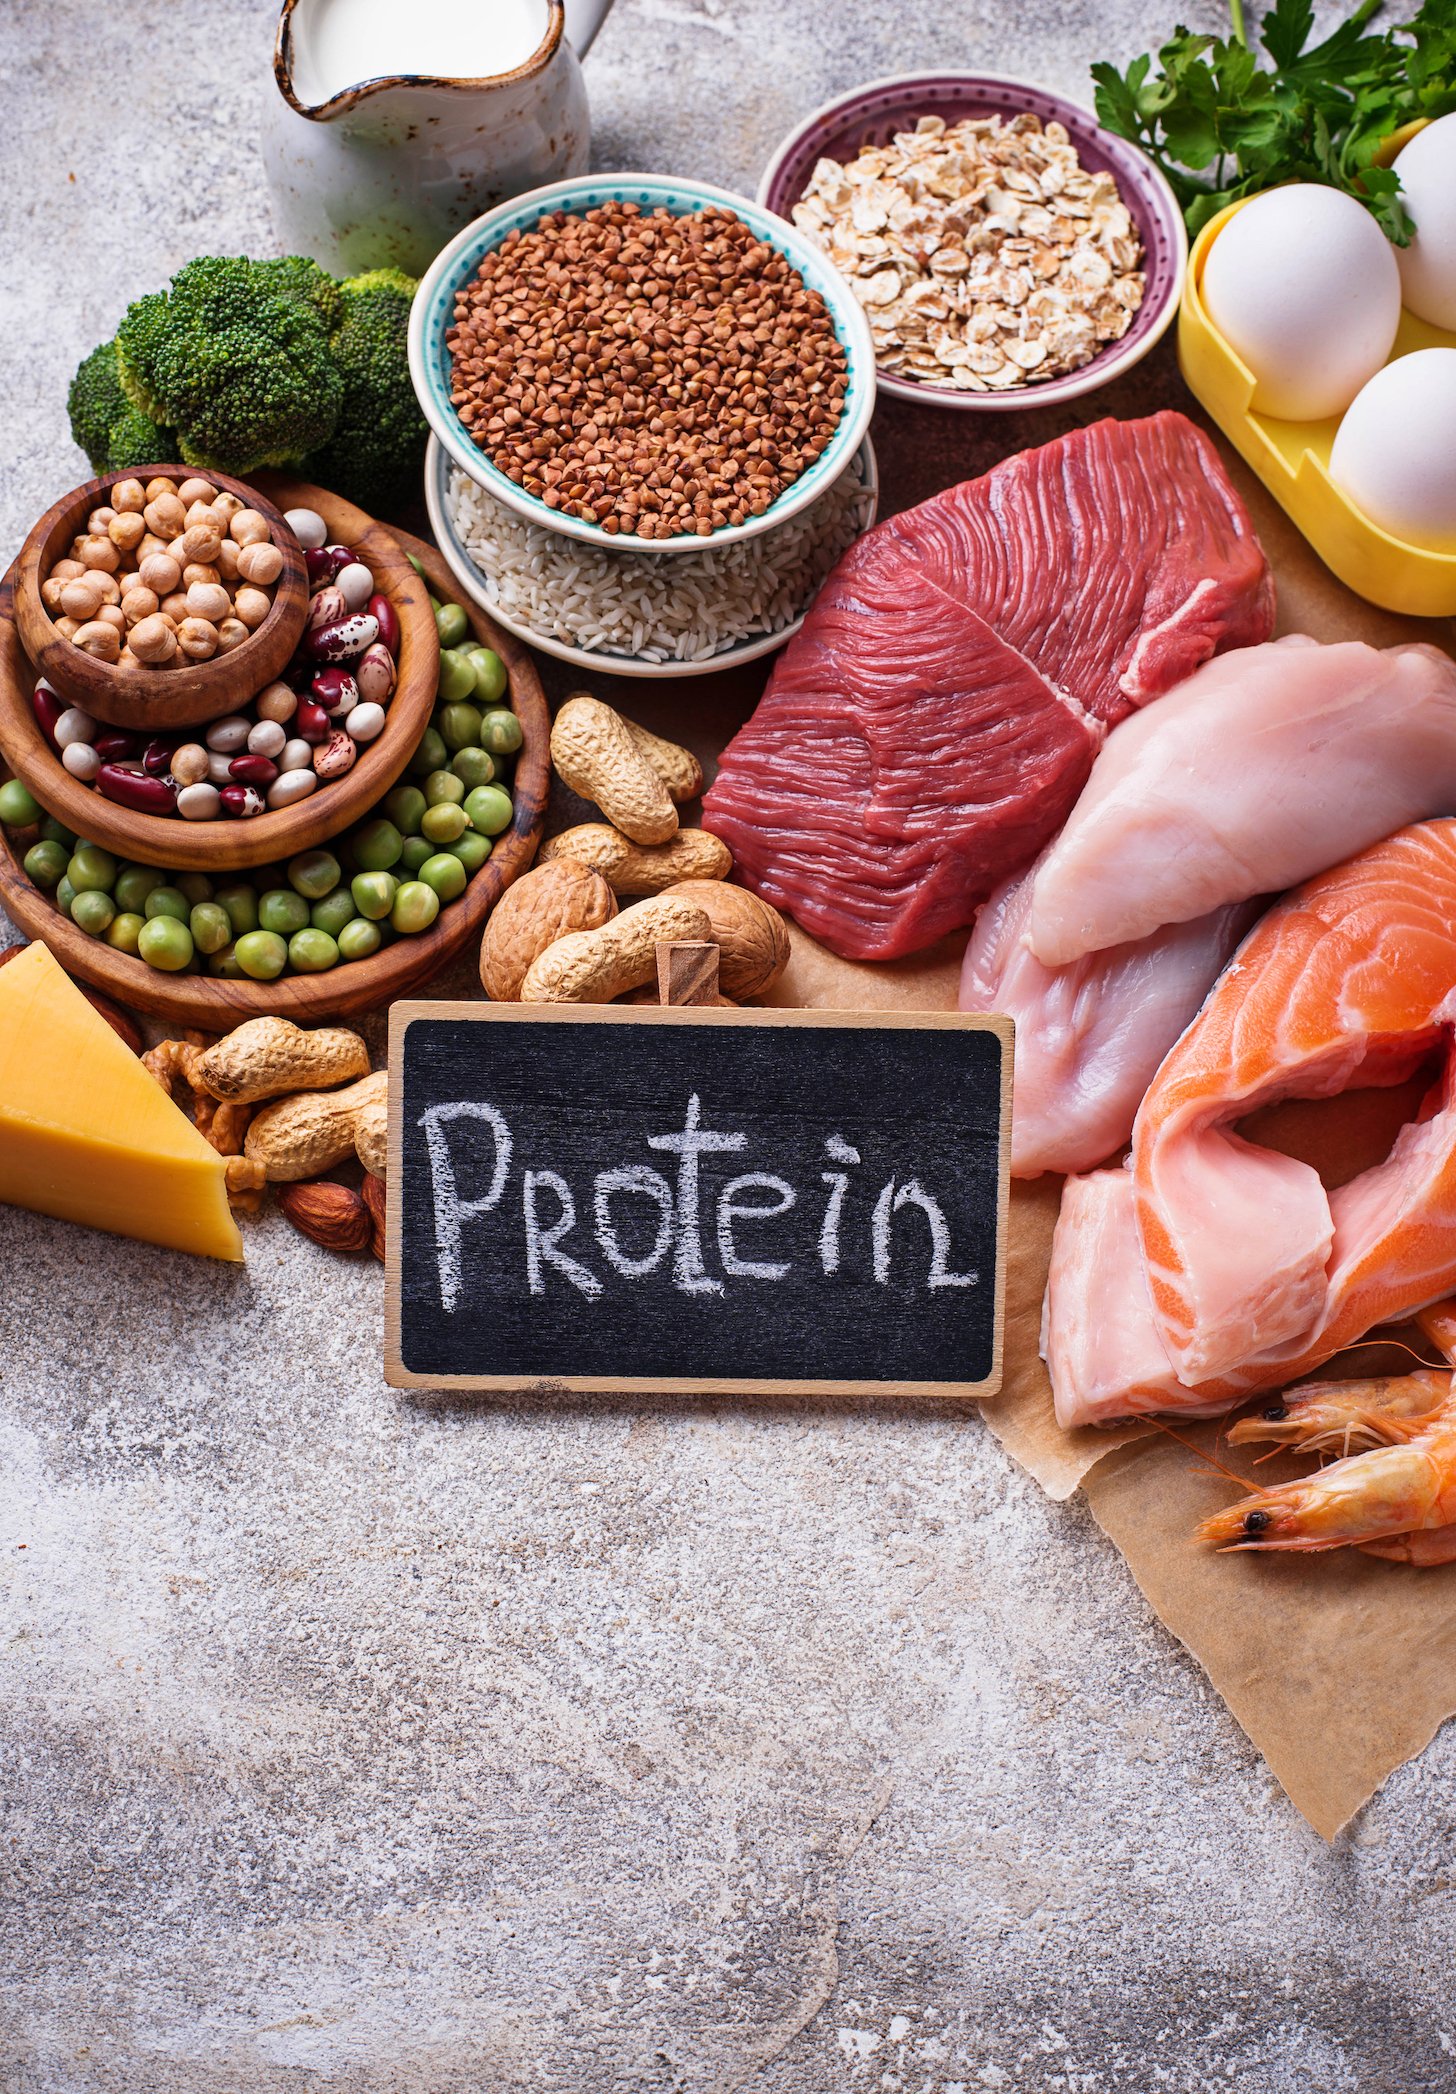 Healthy food high in protein. Meat, fish, dairy products, nuts and beans